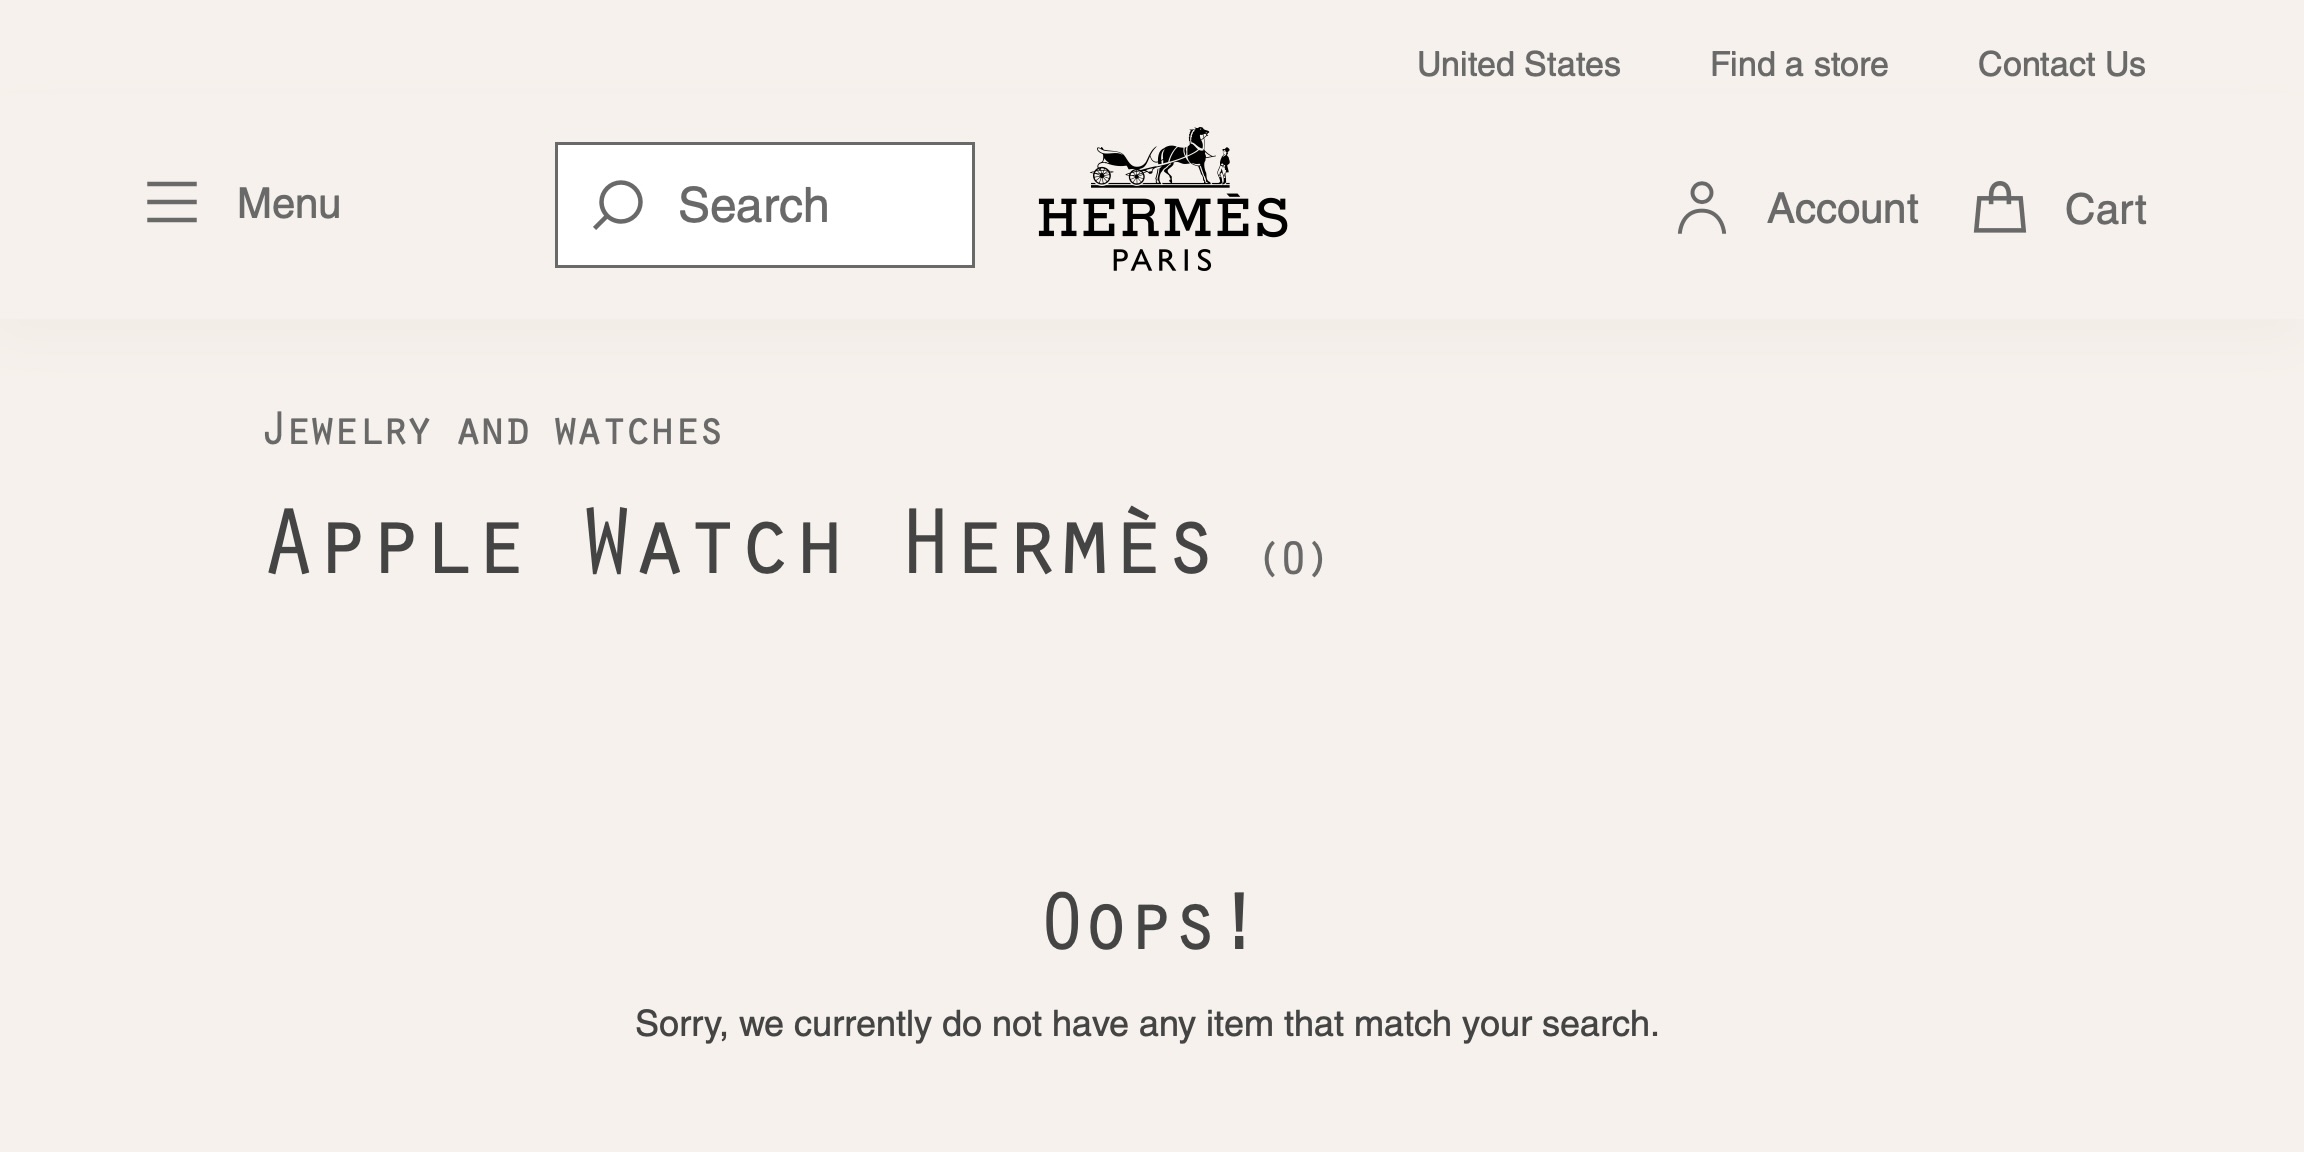 Hermès Set to Expand and Relocate Another Boutique in US